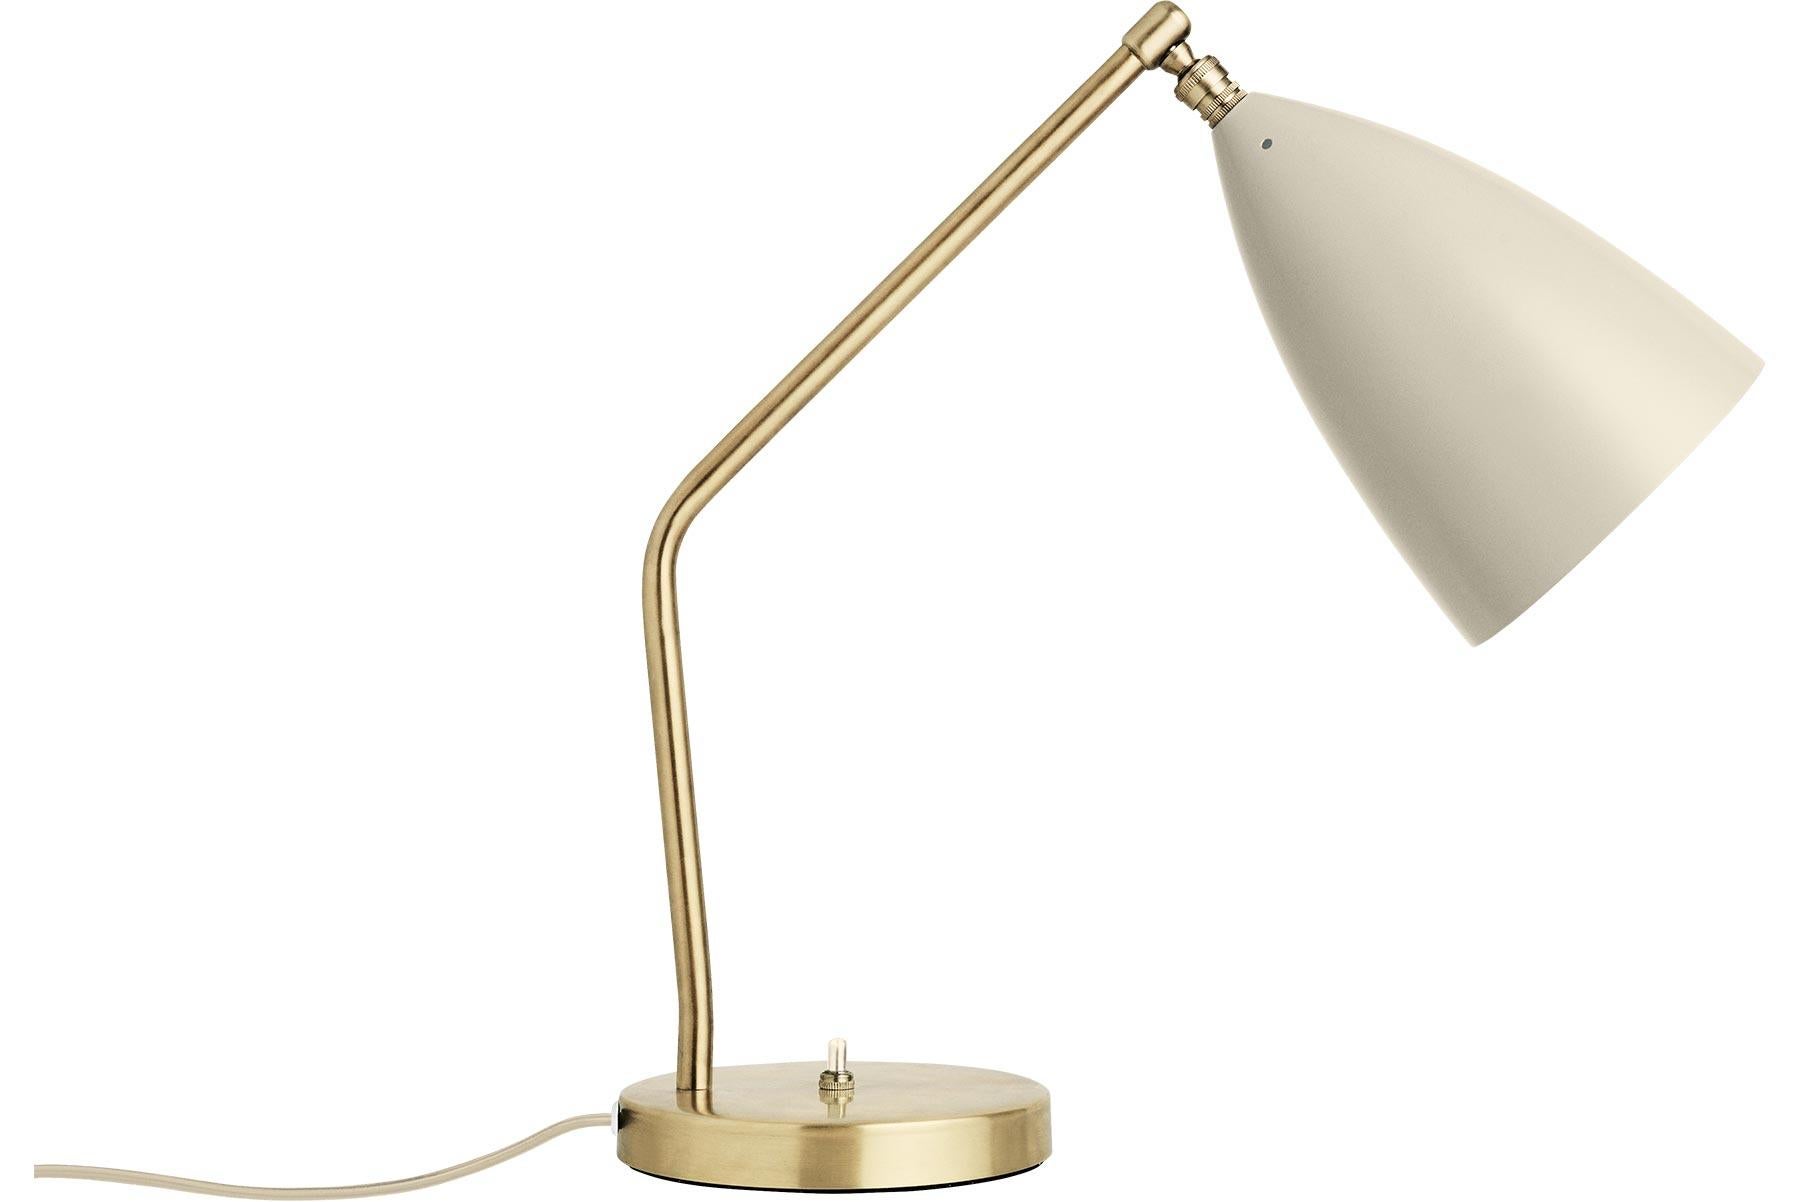 Greta M. Grossman designed the iconic Gräshoppa table lamp in 1947 and with its sophisticated yet playful design, it is still as relevant today. The distinctive, elongated conical shade is beautifully combined with a tubular brass Stand, a great